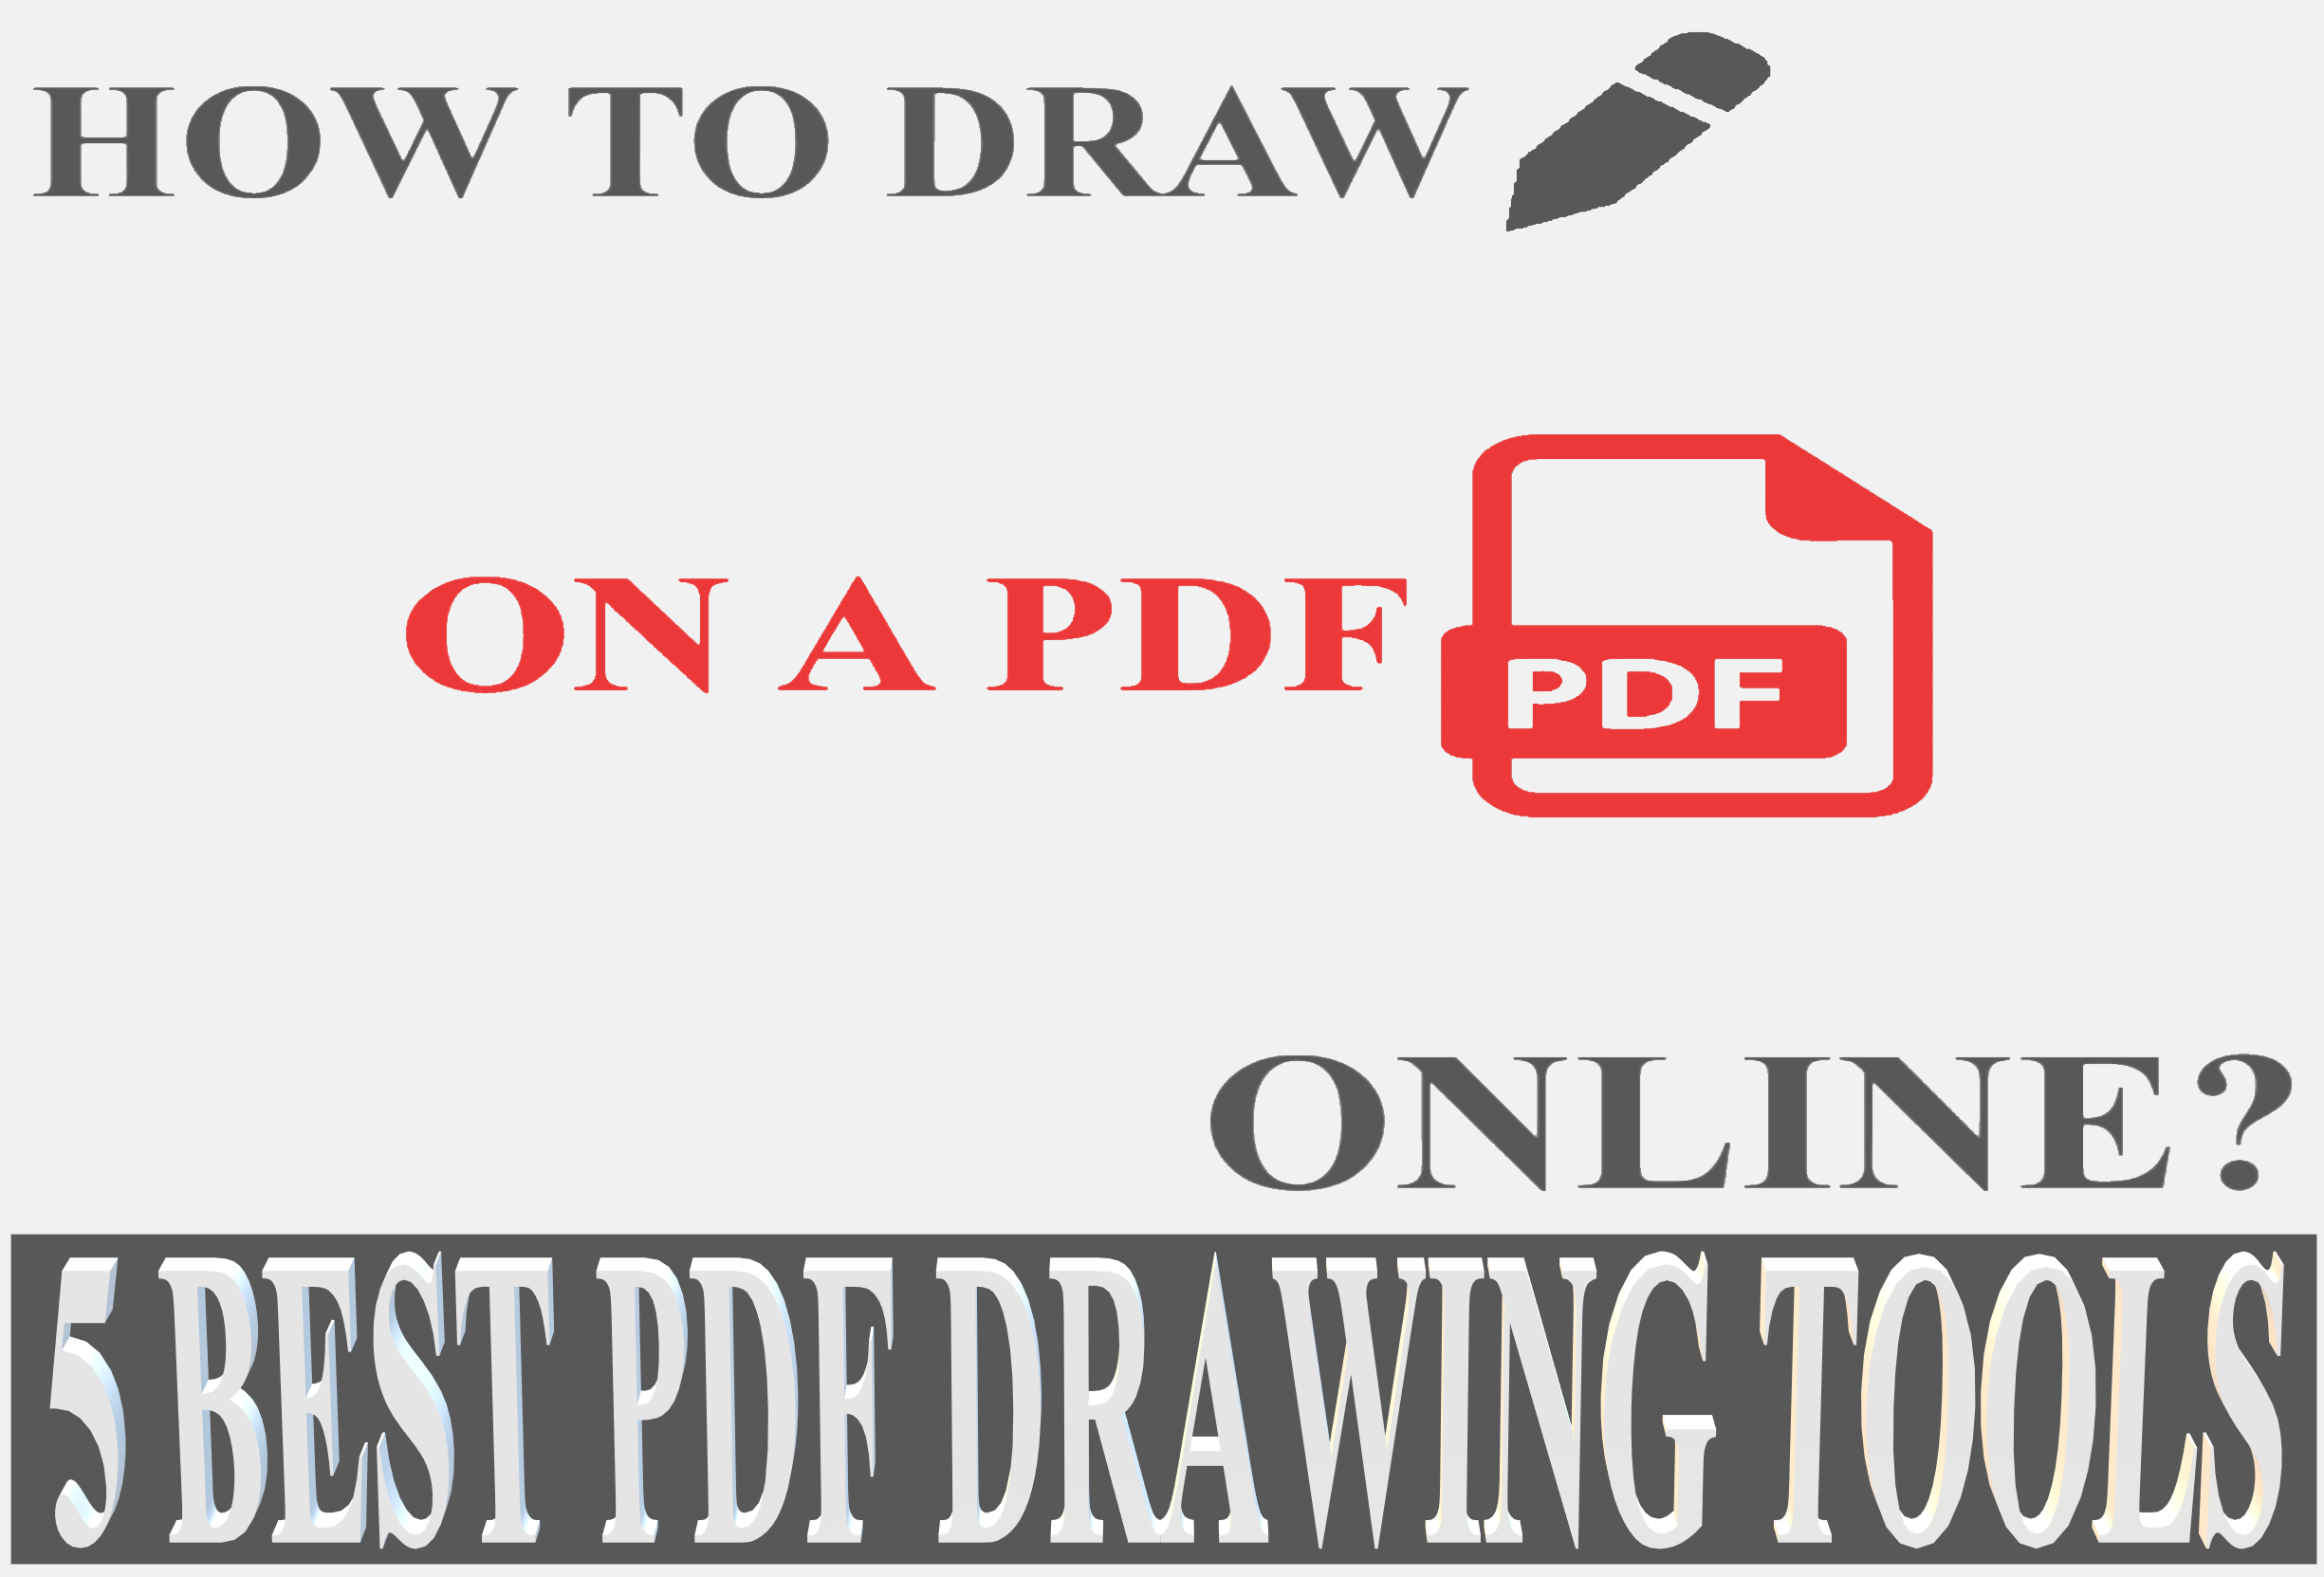 5 best tools and thier use to edit pdf